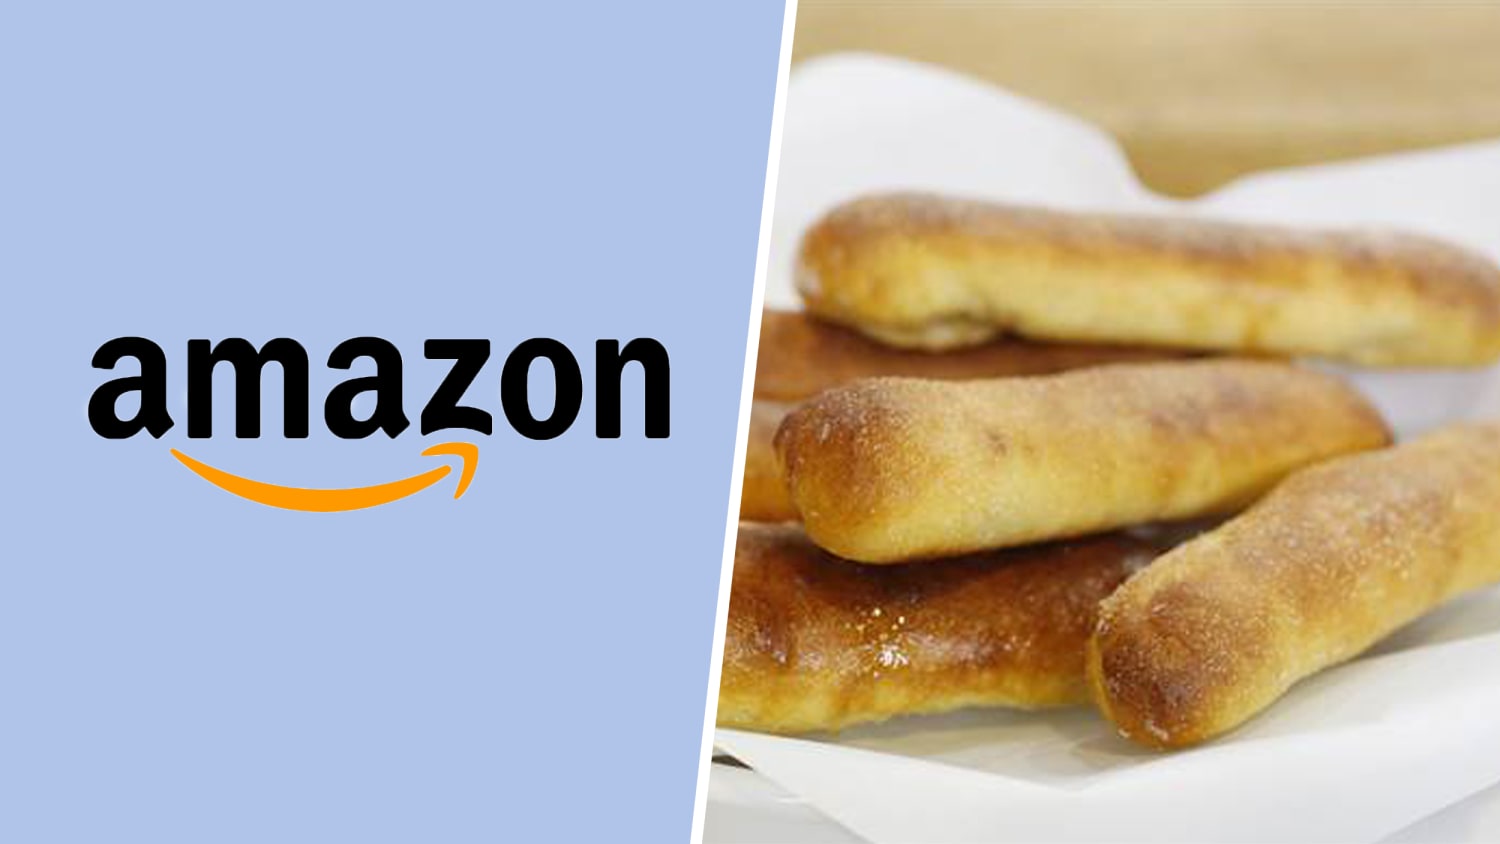 Amazon And Olive Garden Delivery Test In The Works